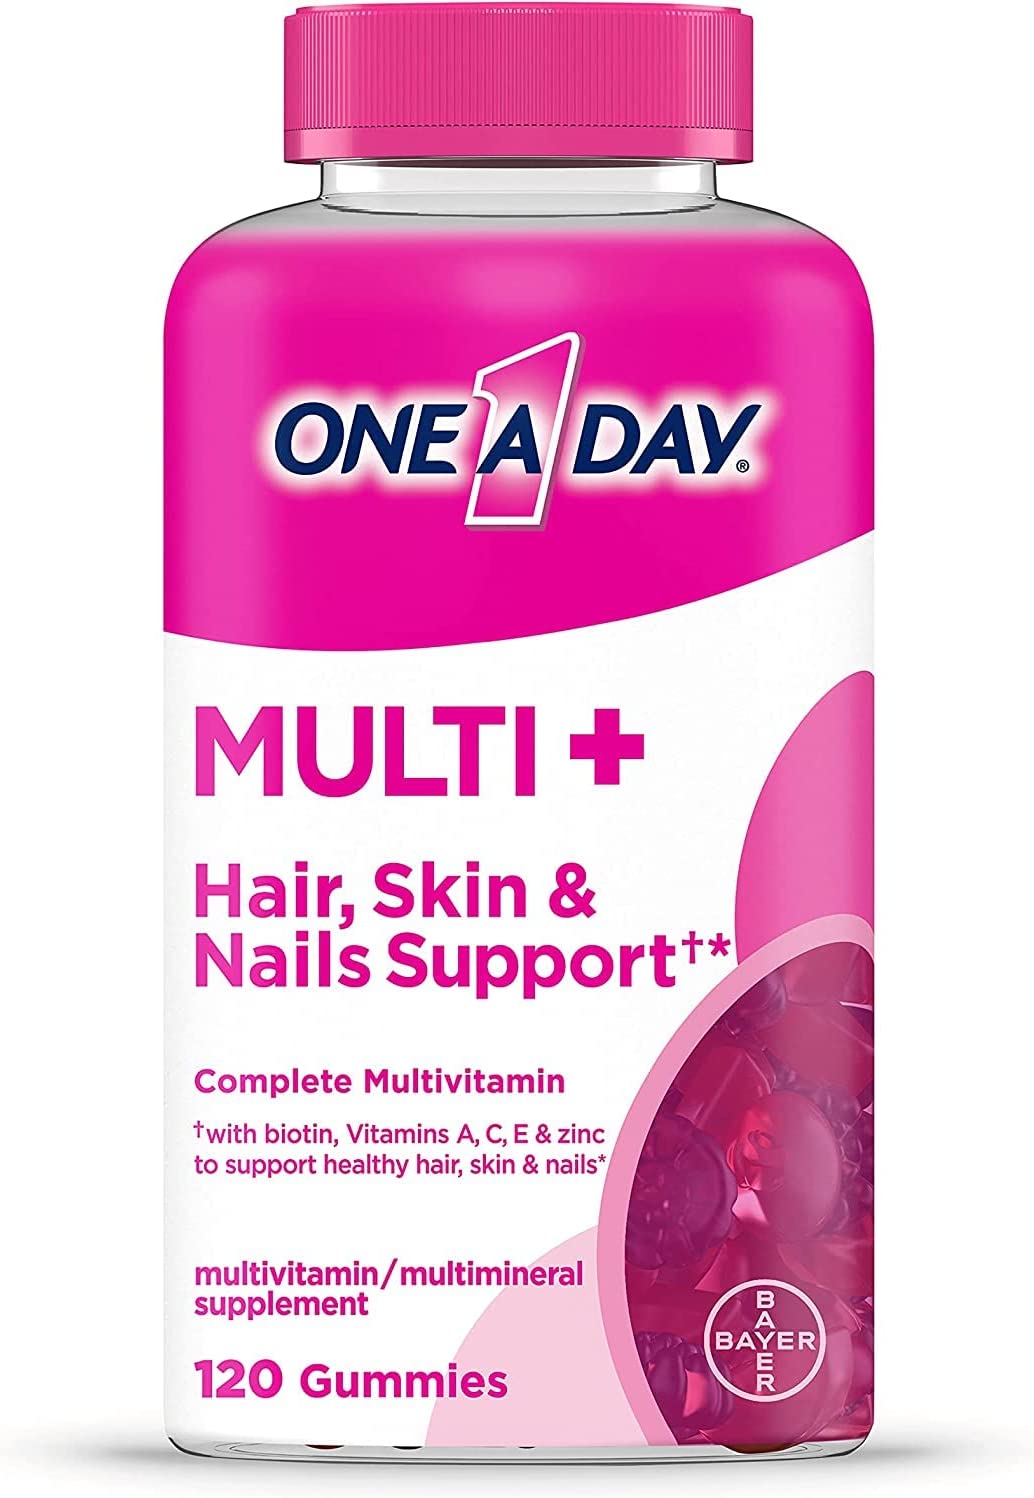 ONE A DAY Multi+ Hair, Skin & Nails, Multivitamin + Boost of Support for Healthy Hair, Skin & Nails with Biotin and Vitamins A, C, E & Zinc